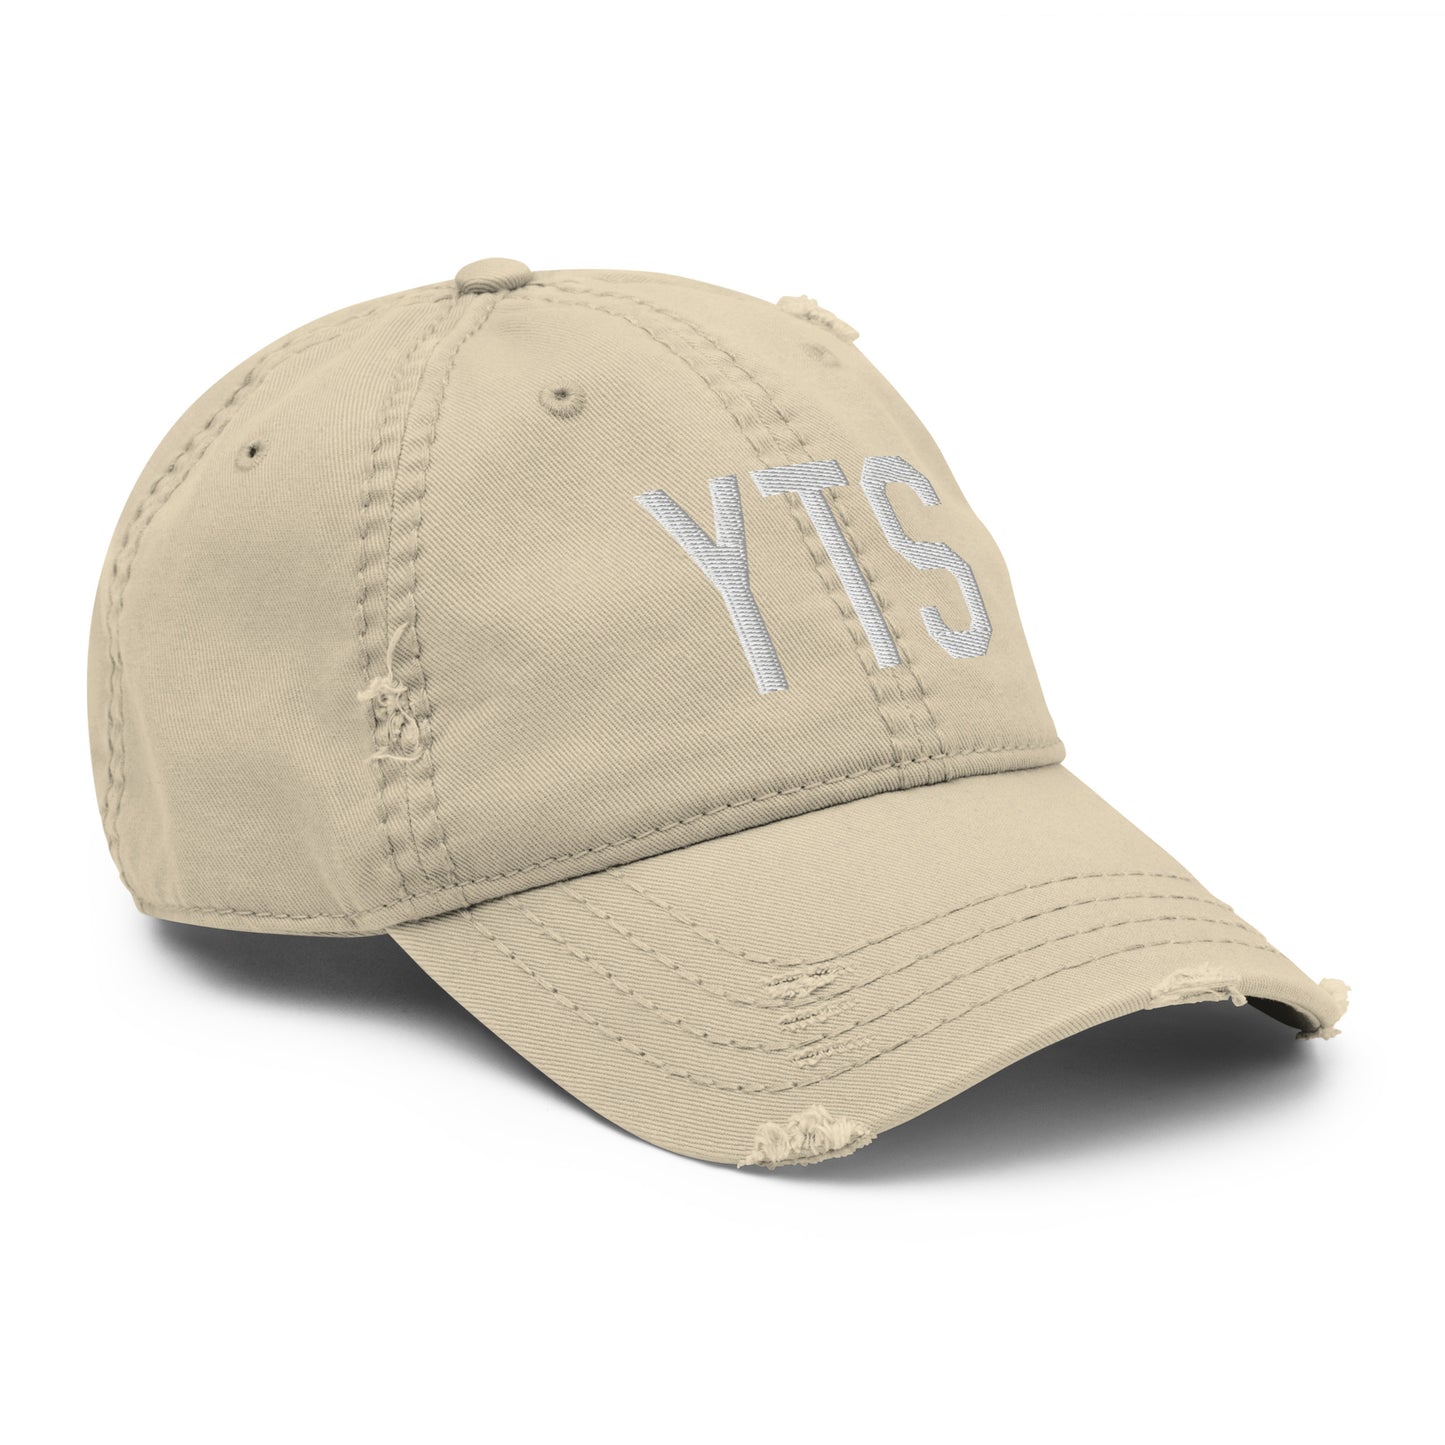 Airport Code Distressed Hat - White • YTS Timmins • YHM Designs - Image 20